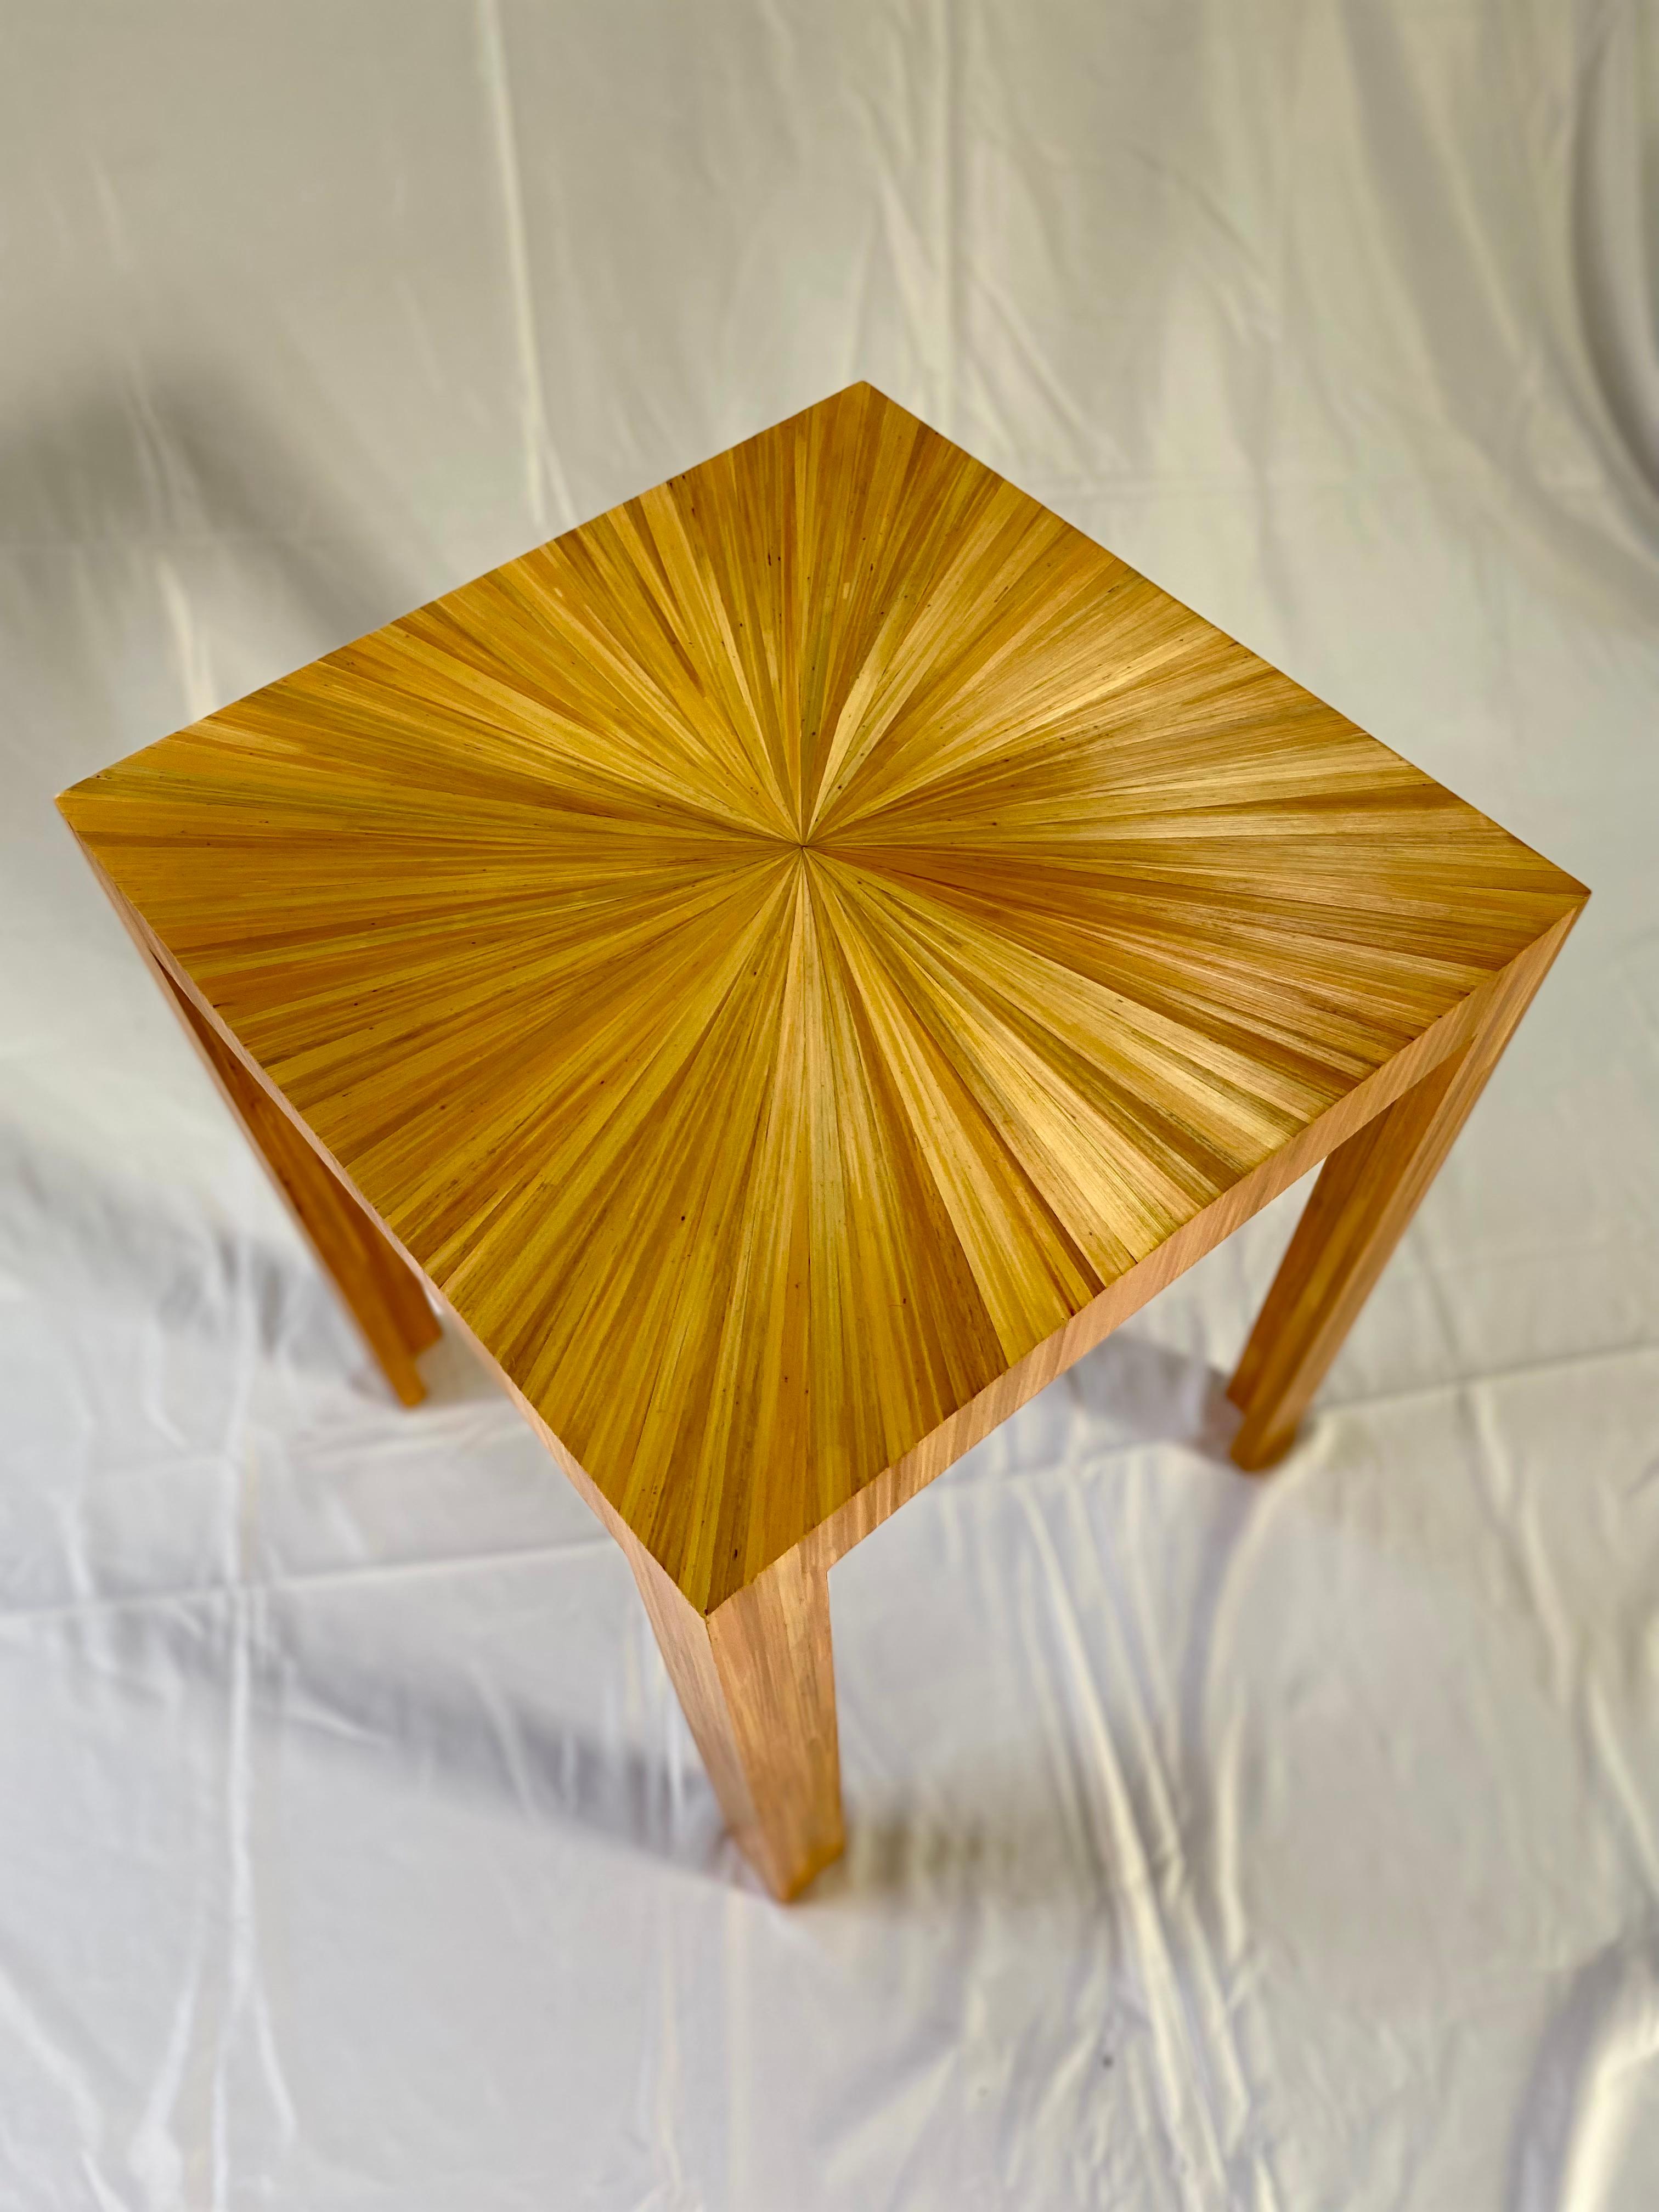 Famous side table in the style of Jean-Michel Frank, famous designer of the Art Deco period.
It takes up all the codes, entirely inlaid with rye straw, with the top in a sun motif, to illuminate the whole room.
Elegant and timeless, this side table